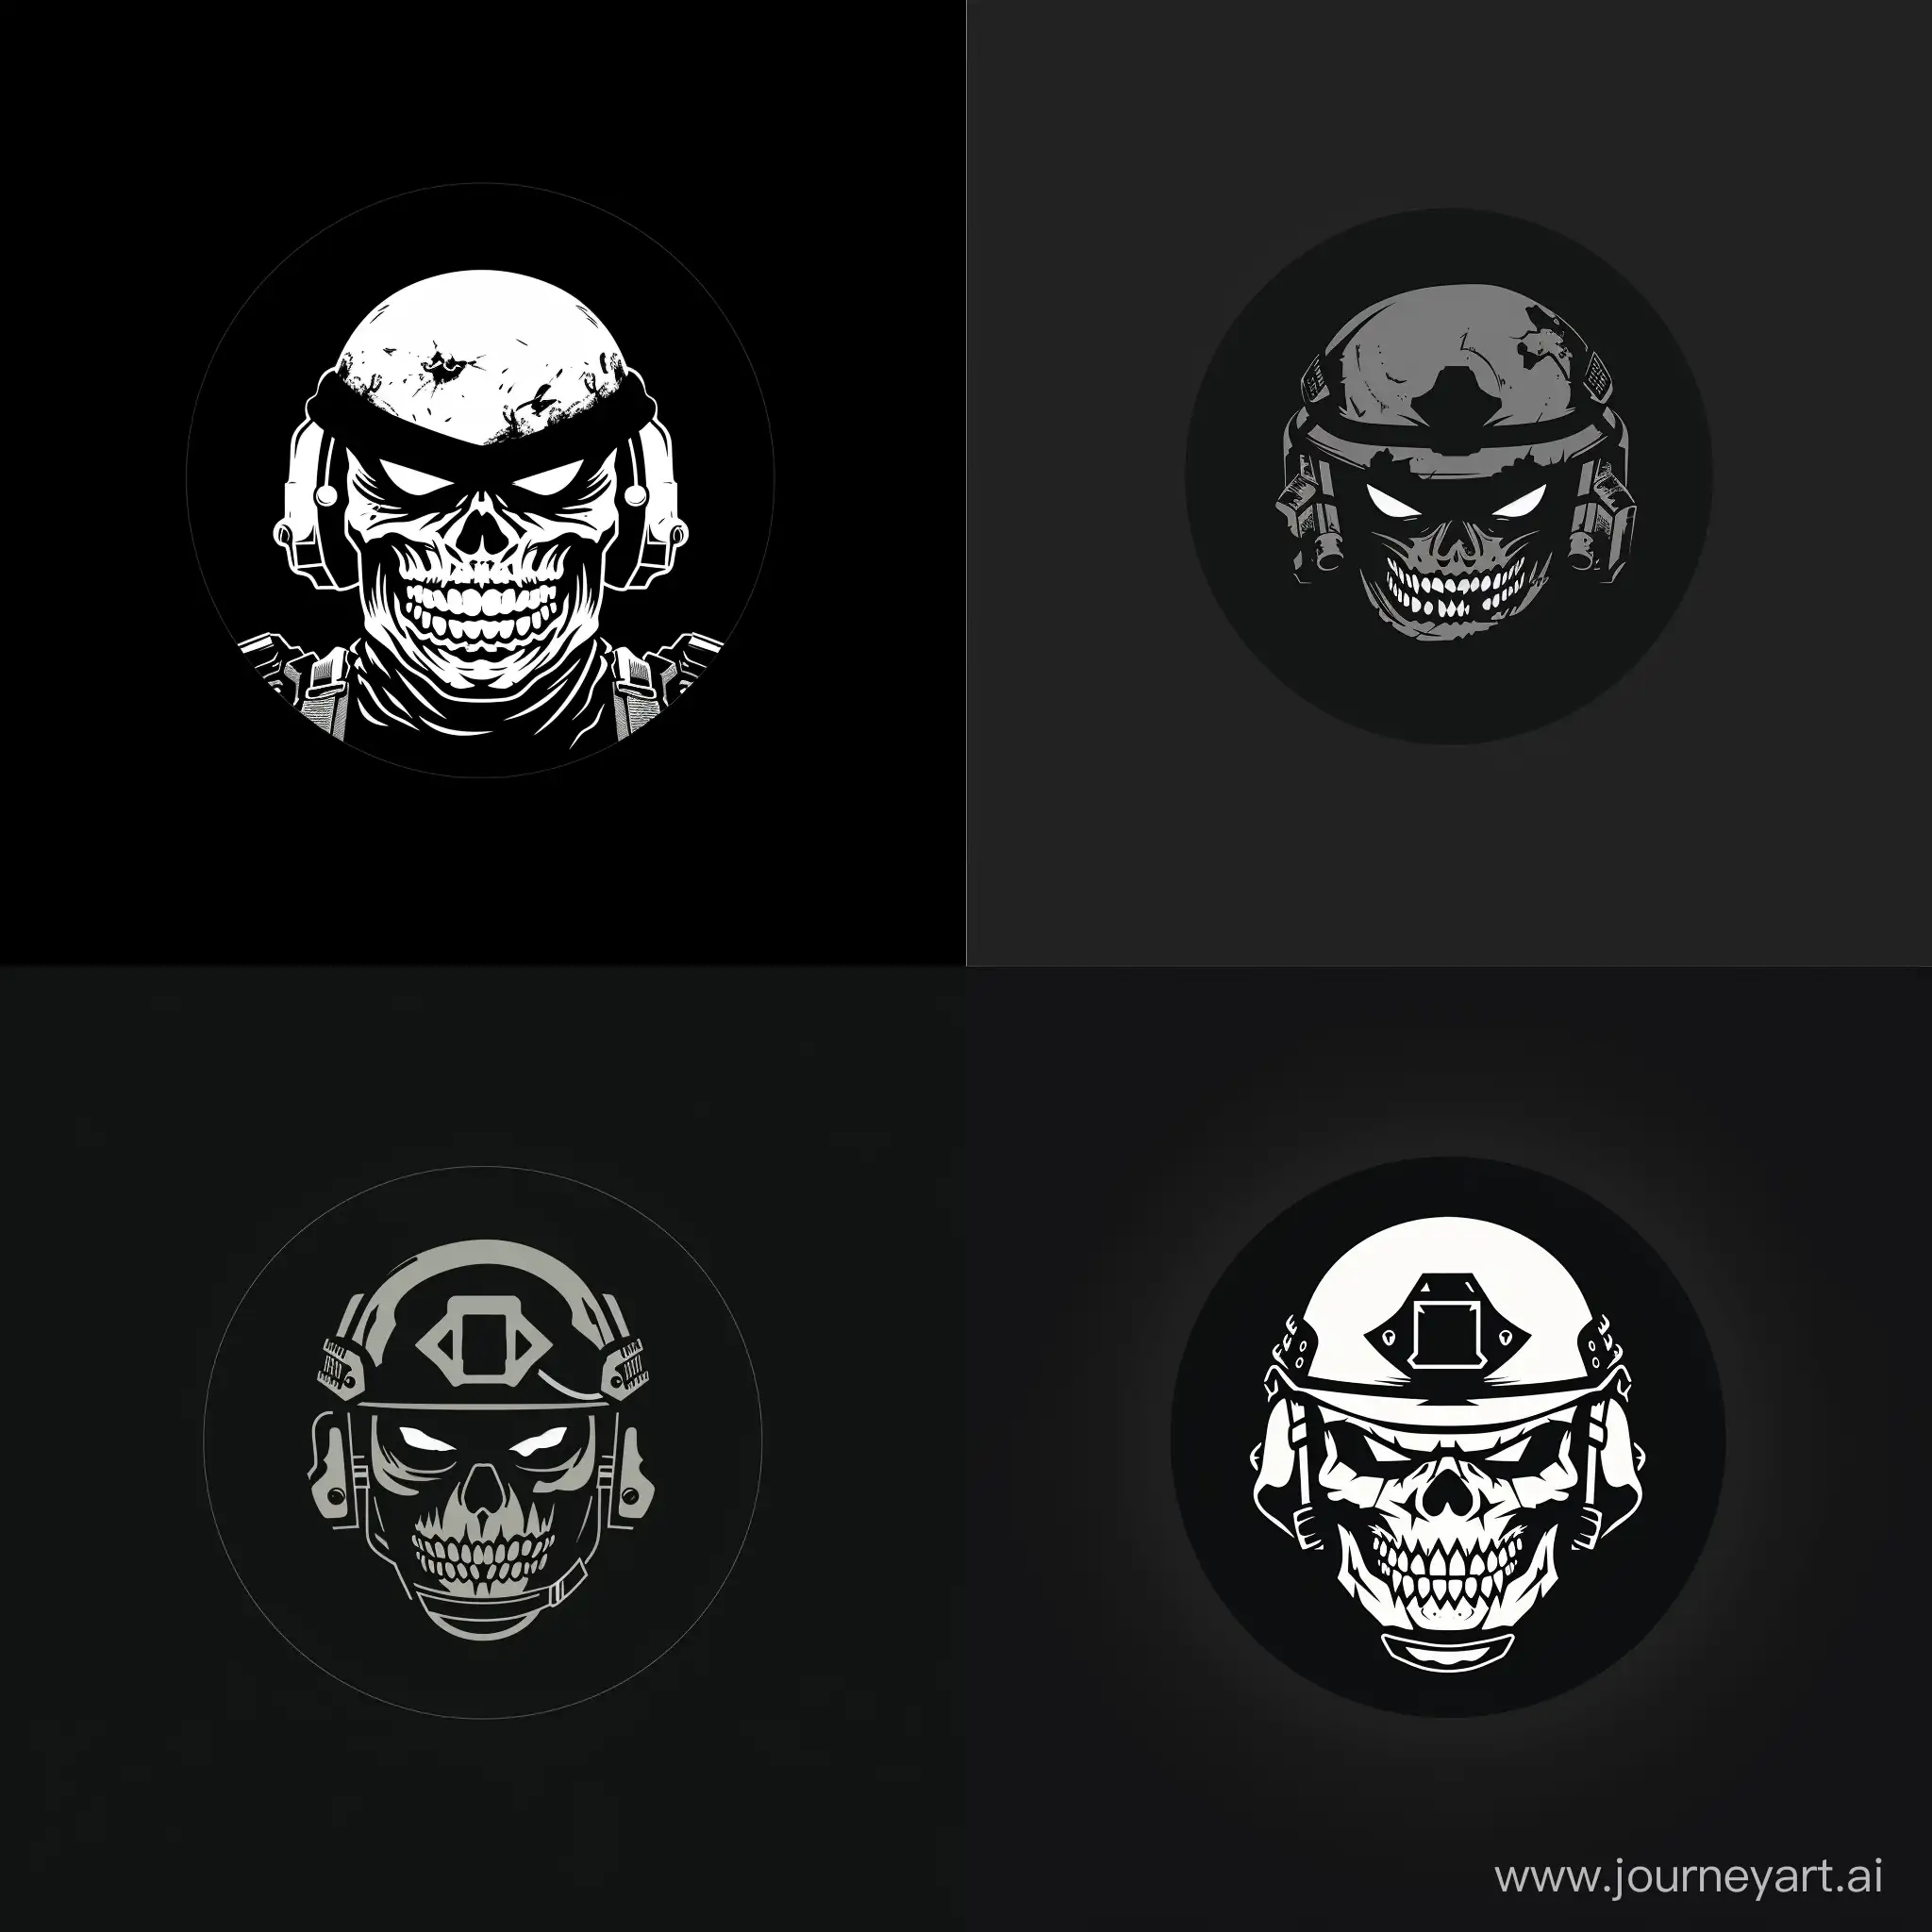 Minimalistic-Black-Logo-with-Angry-Smile-and-Skull-Mask-on-Modern-Military-Equipment